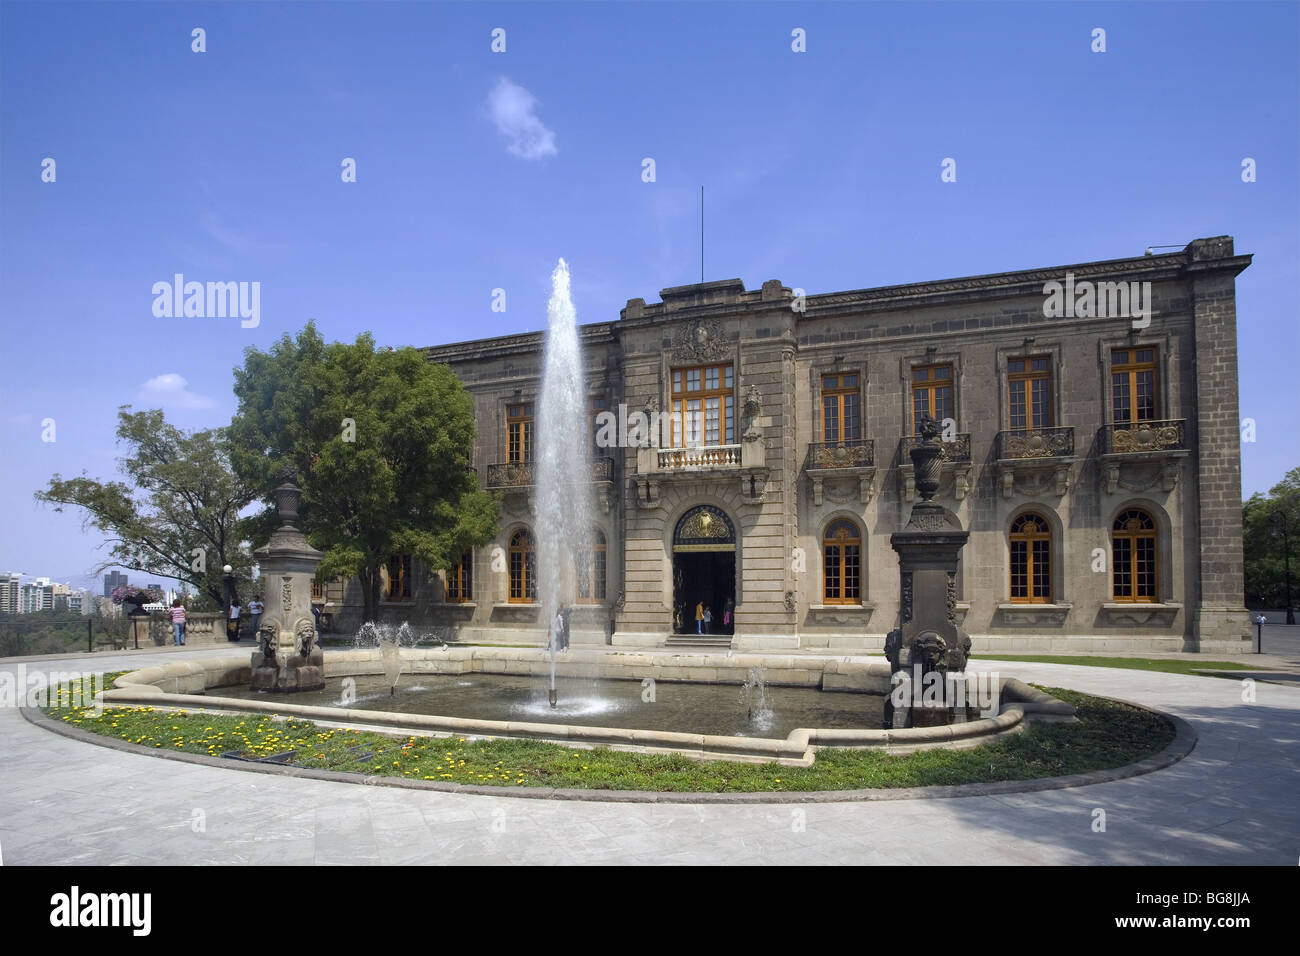 NATIONAL MUSEUM OF HISTORY befindet sich im Schloss Chapultepec. MEXICO D.F. Mexiko. Stockfoto